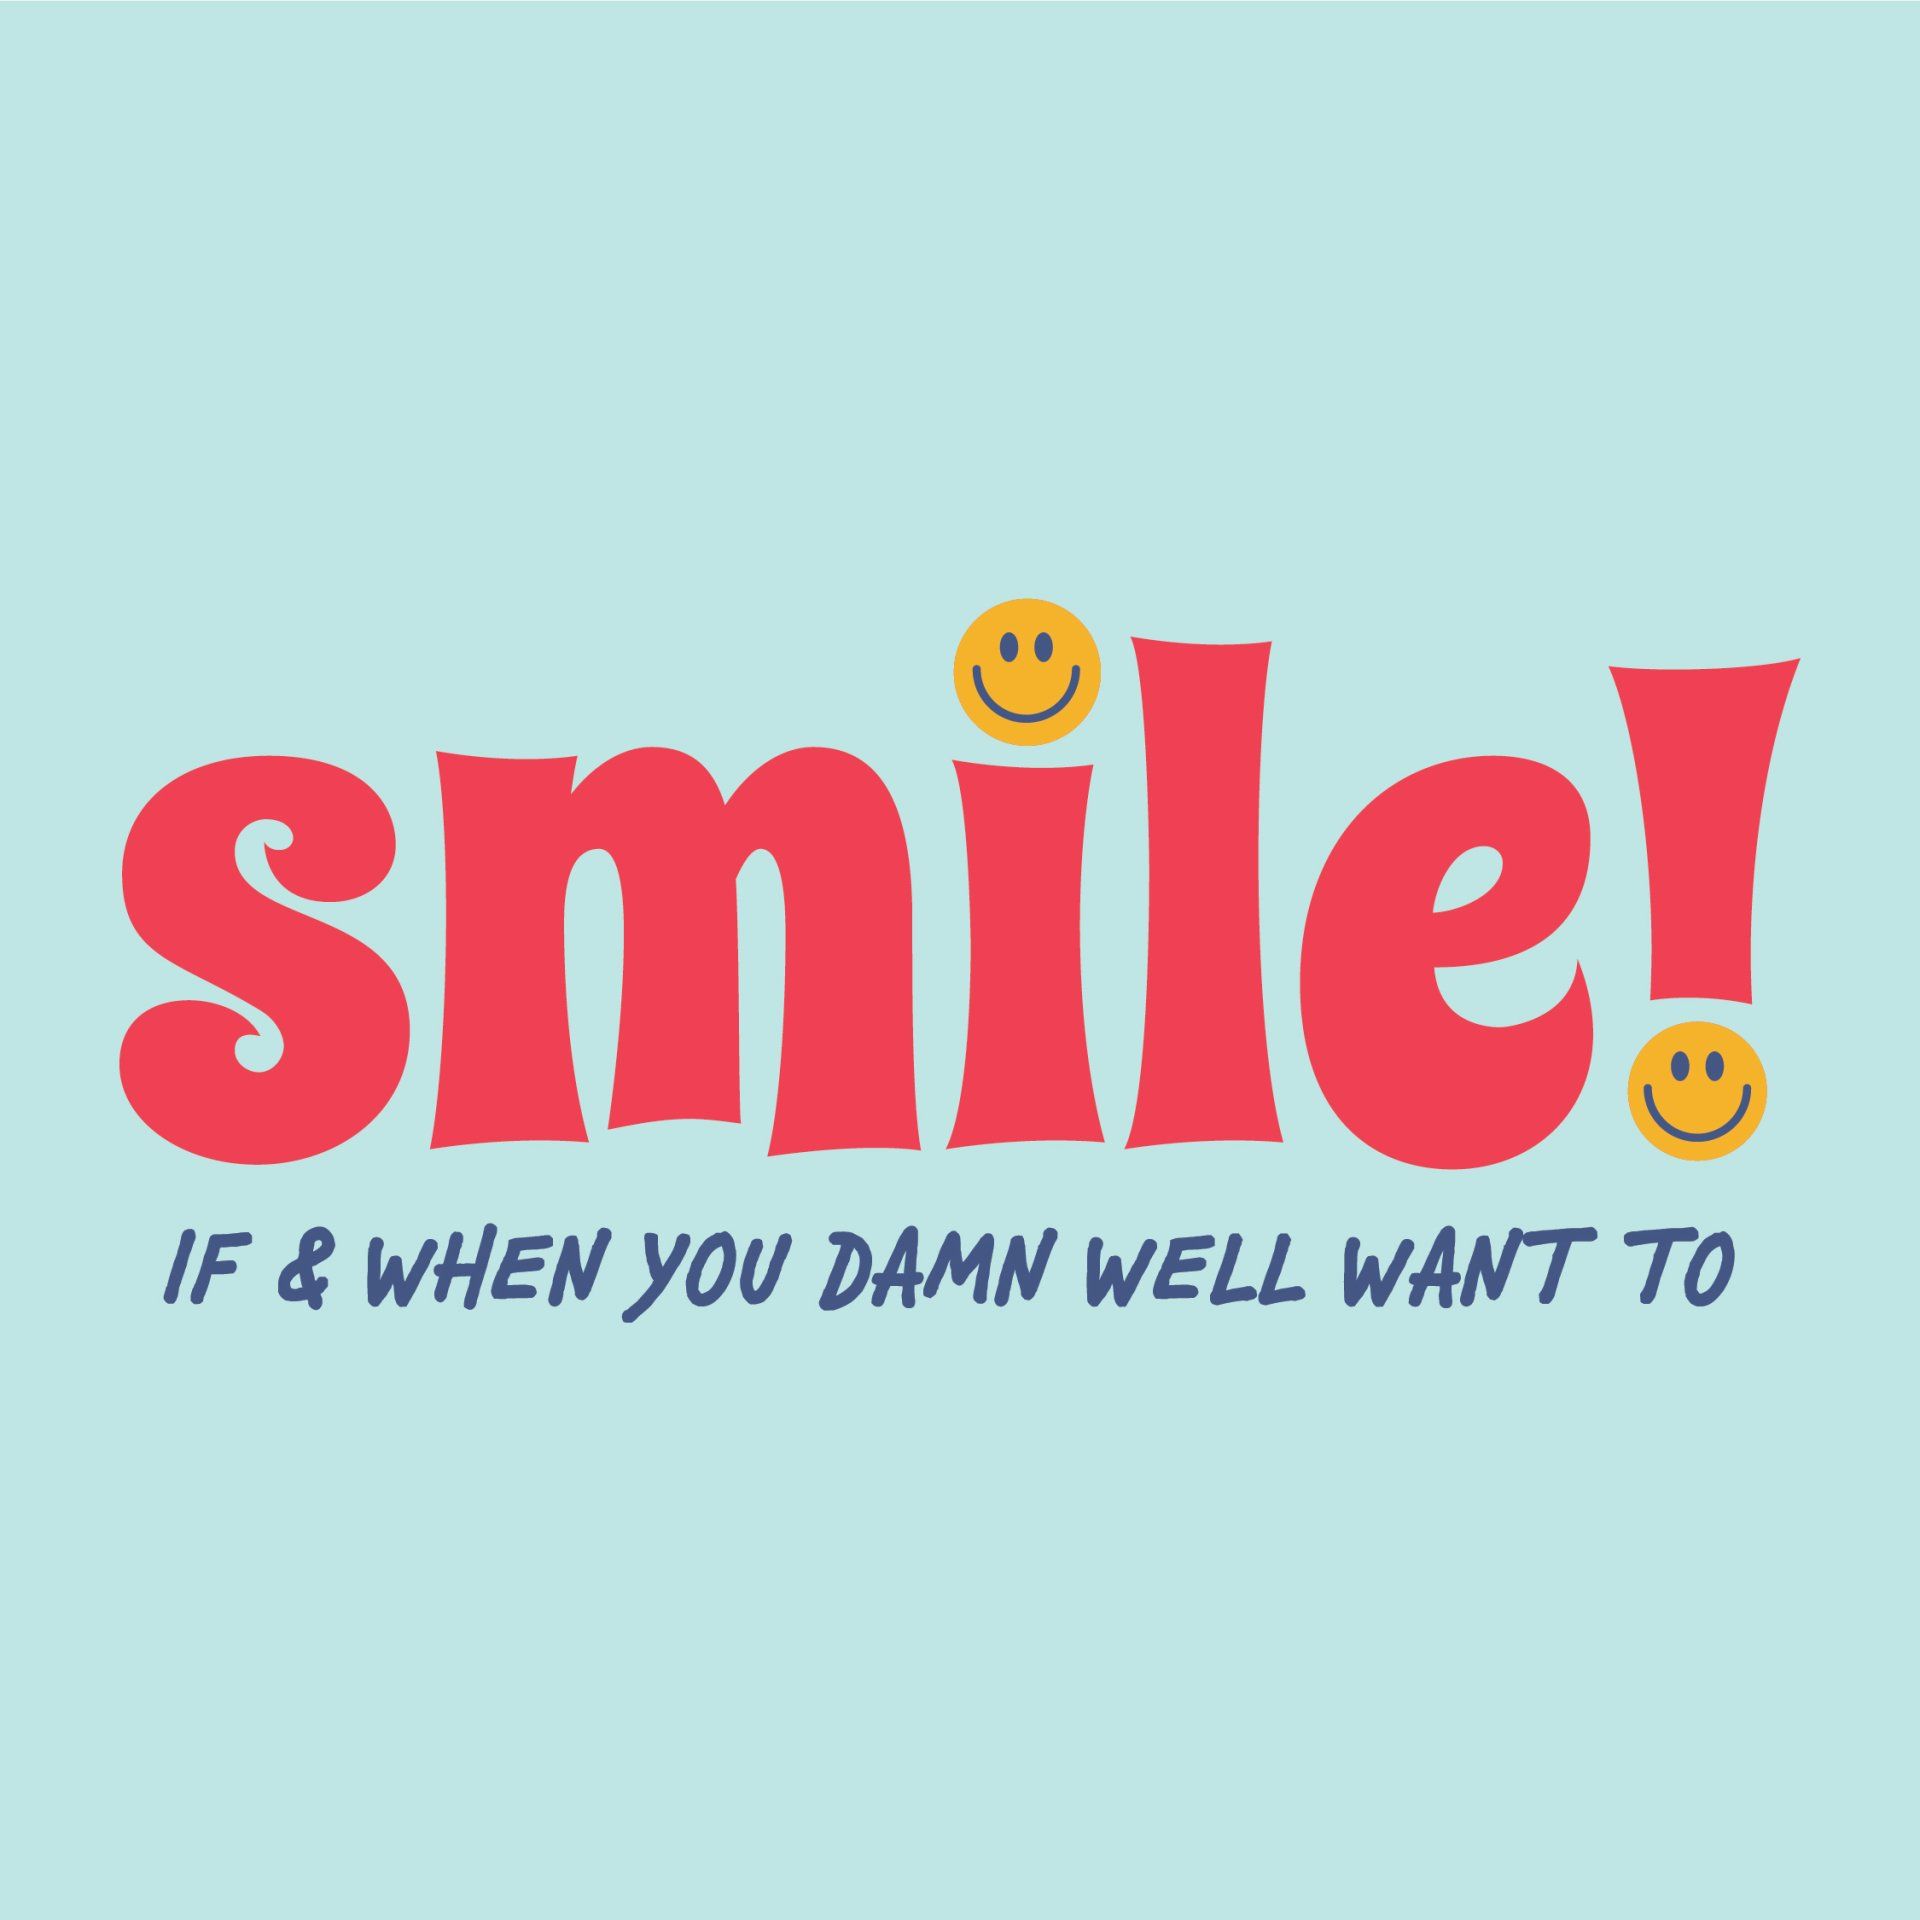 Smile! If & When You Damn Well Want To